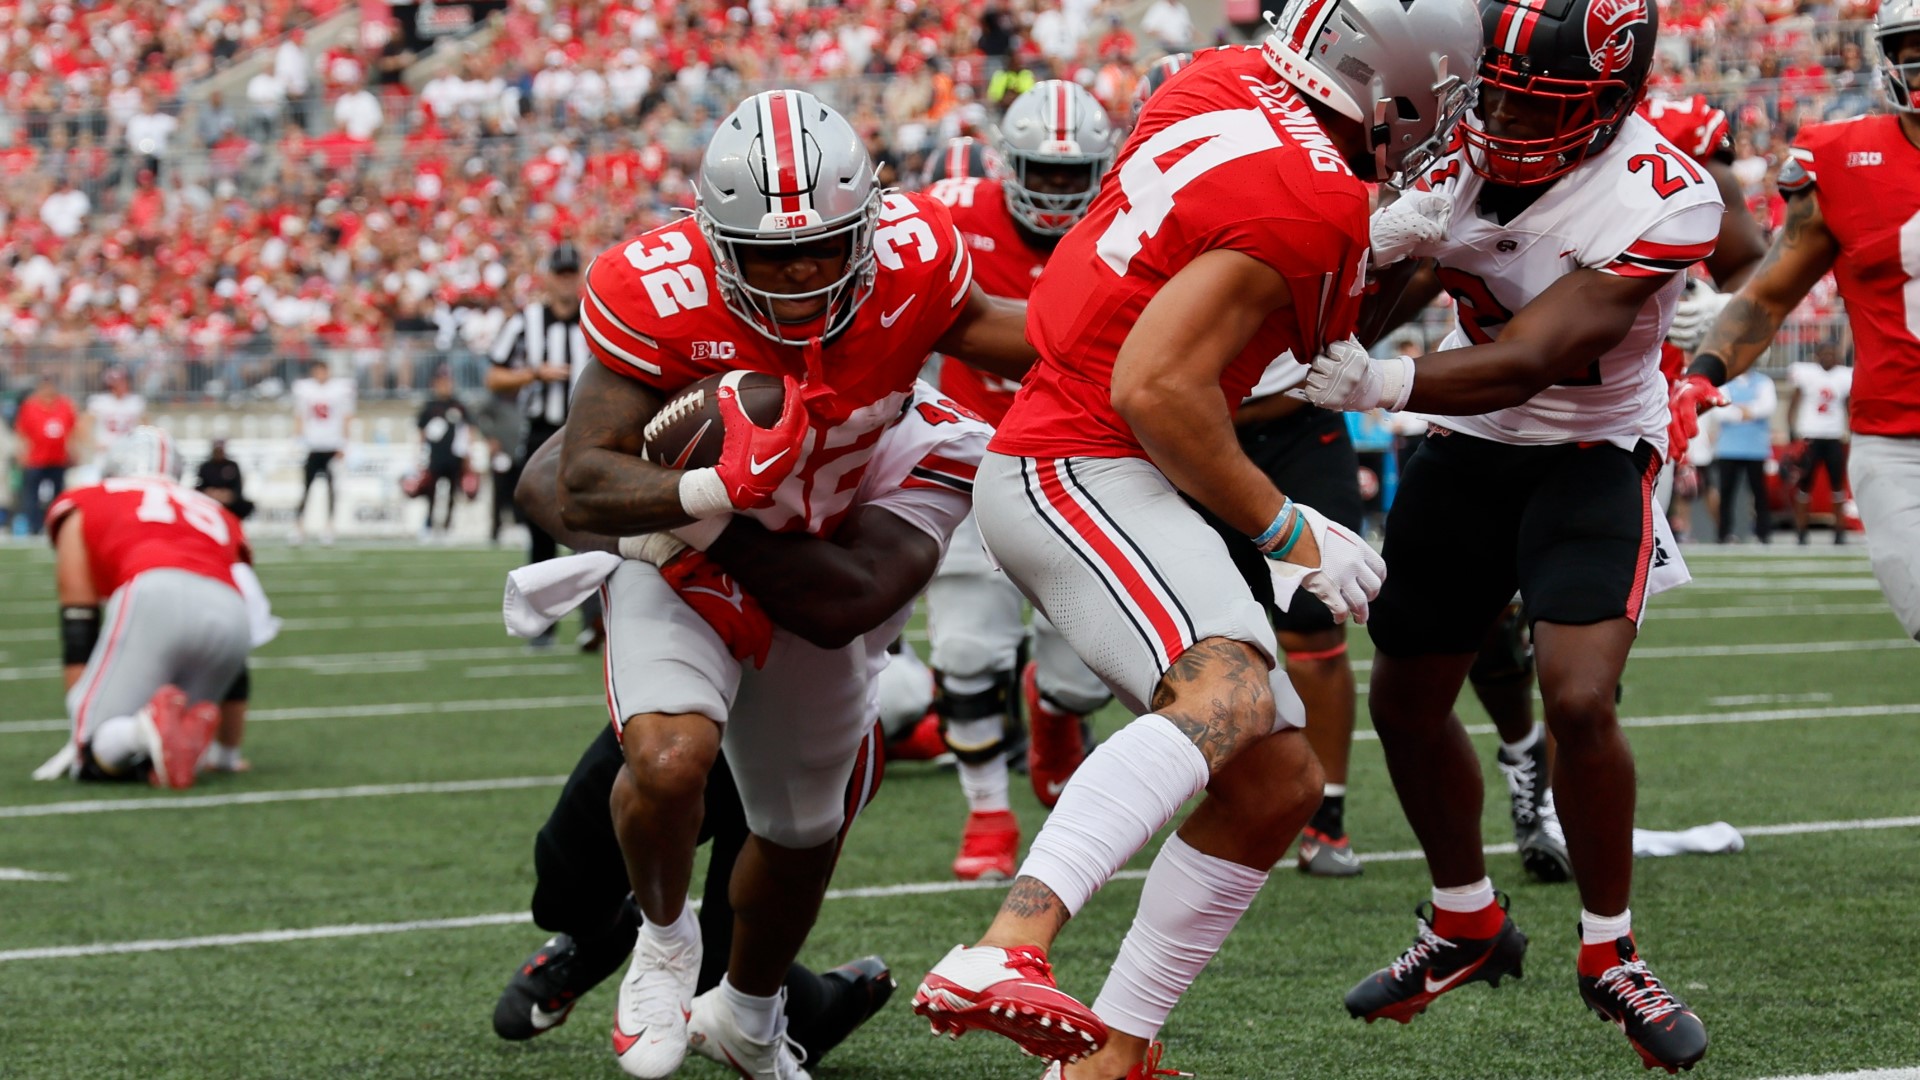 Kyle McCord threw for three touchdowns and 318 yards and No. 6 Ohio State used a 35-point second quarter to rout Western Kentucky 63-10 at Ohio Stadium on Saturday.